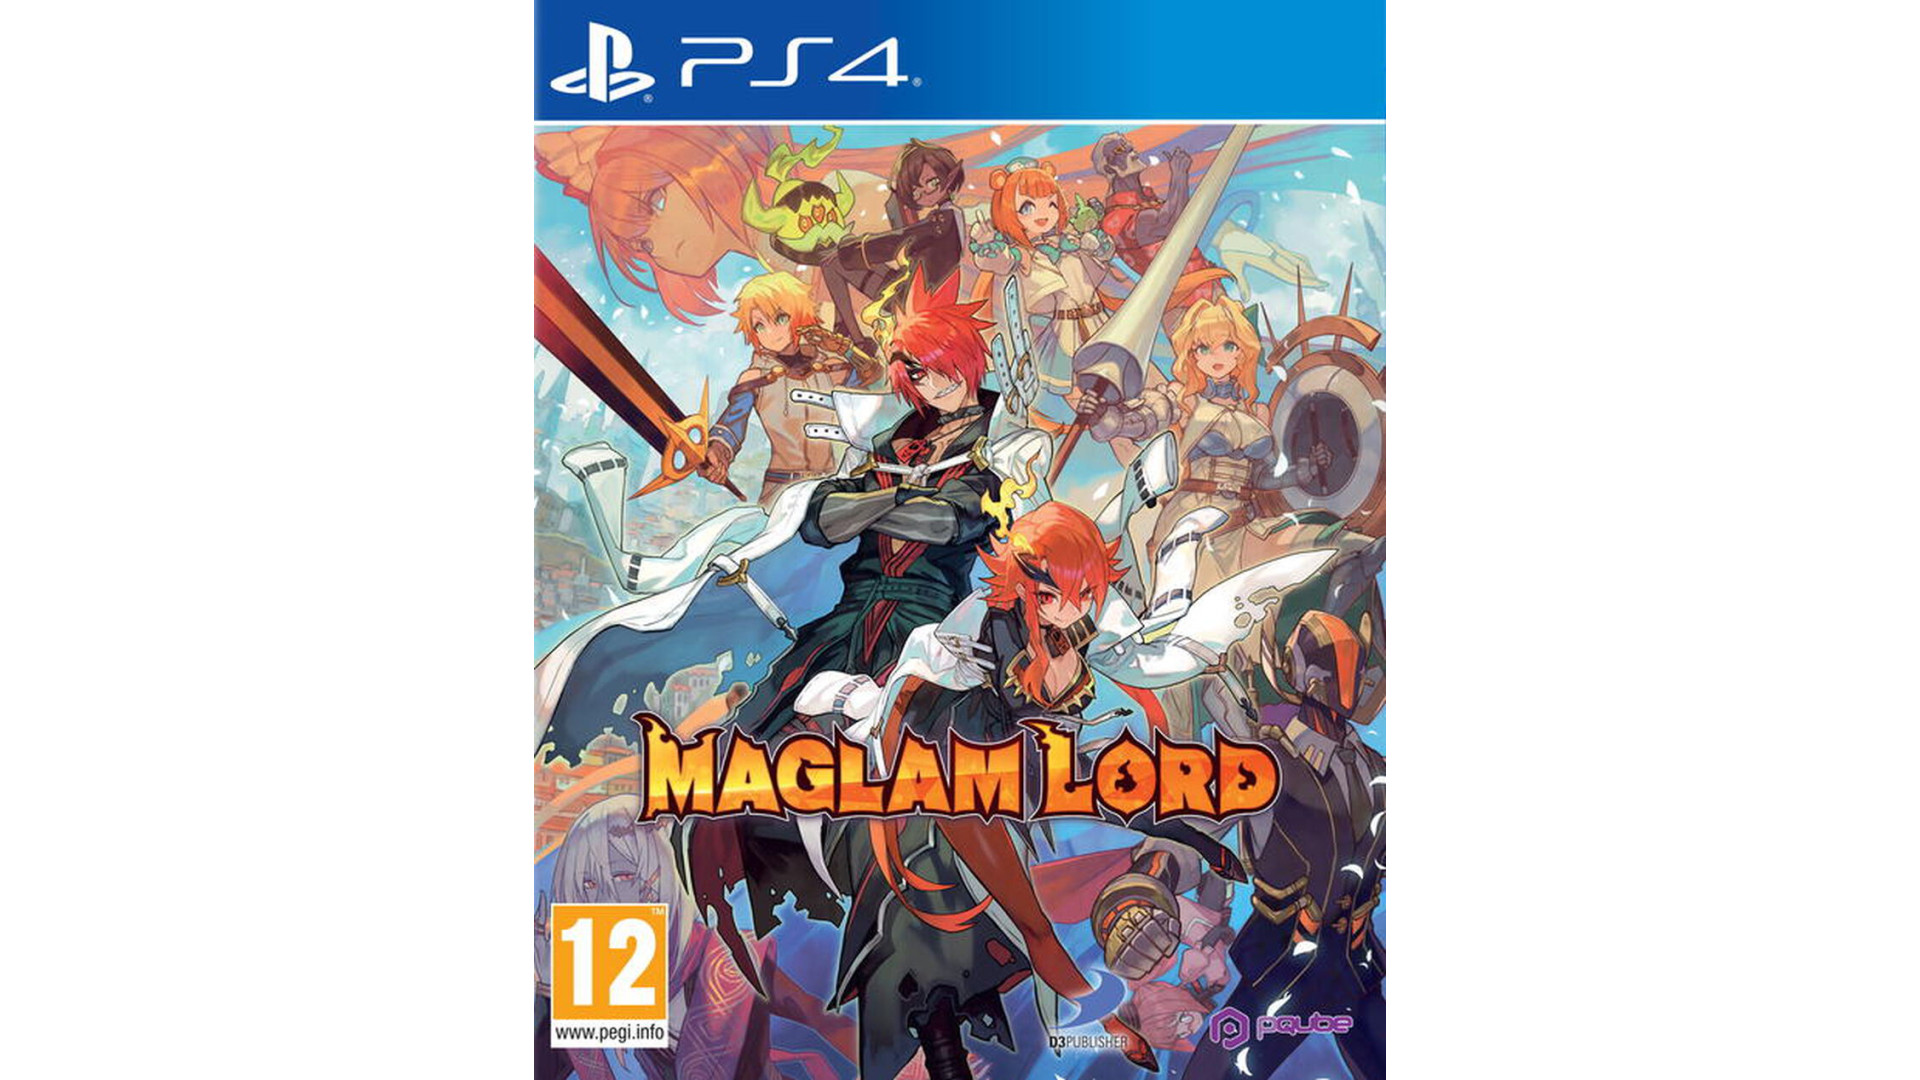 Acheter Maglam Lord PS4